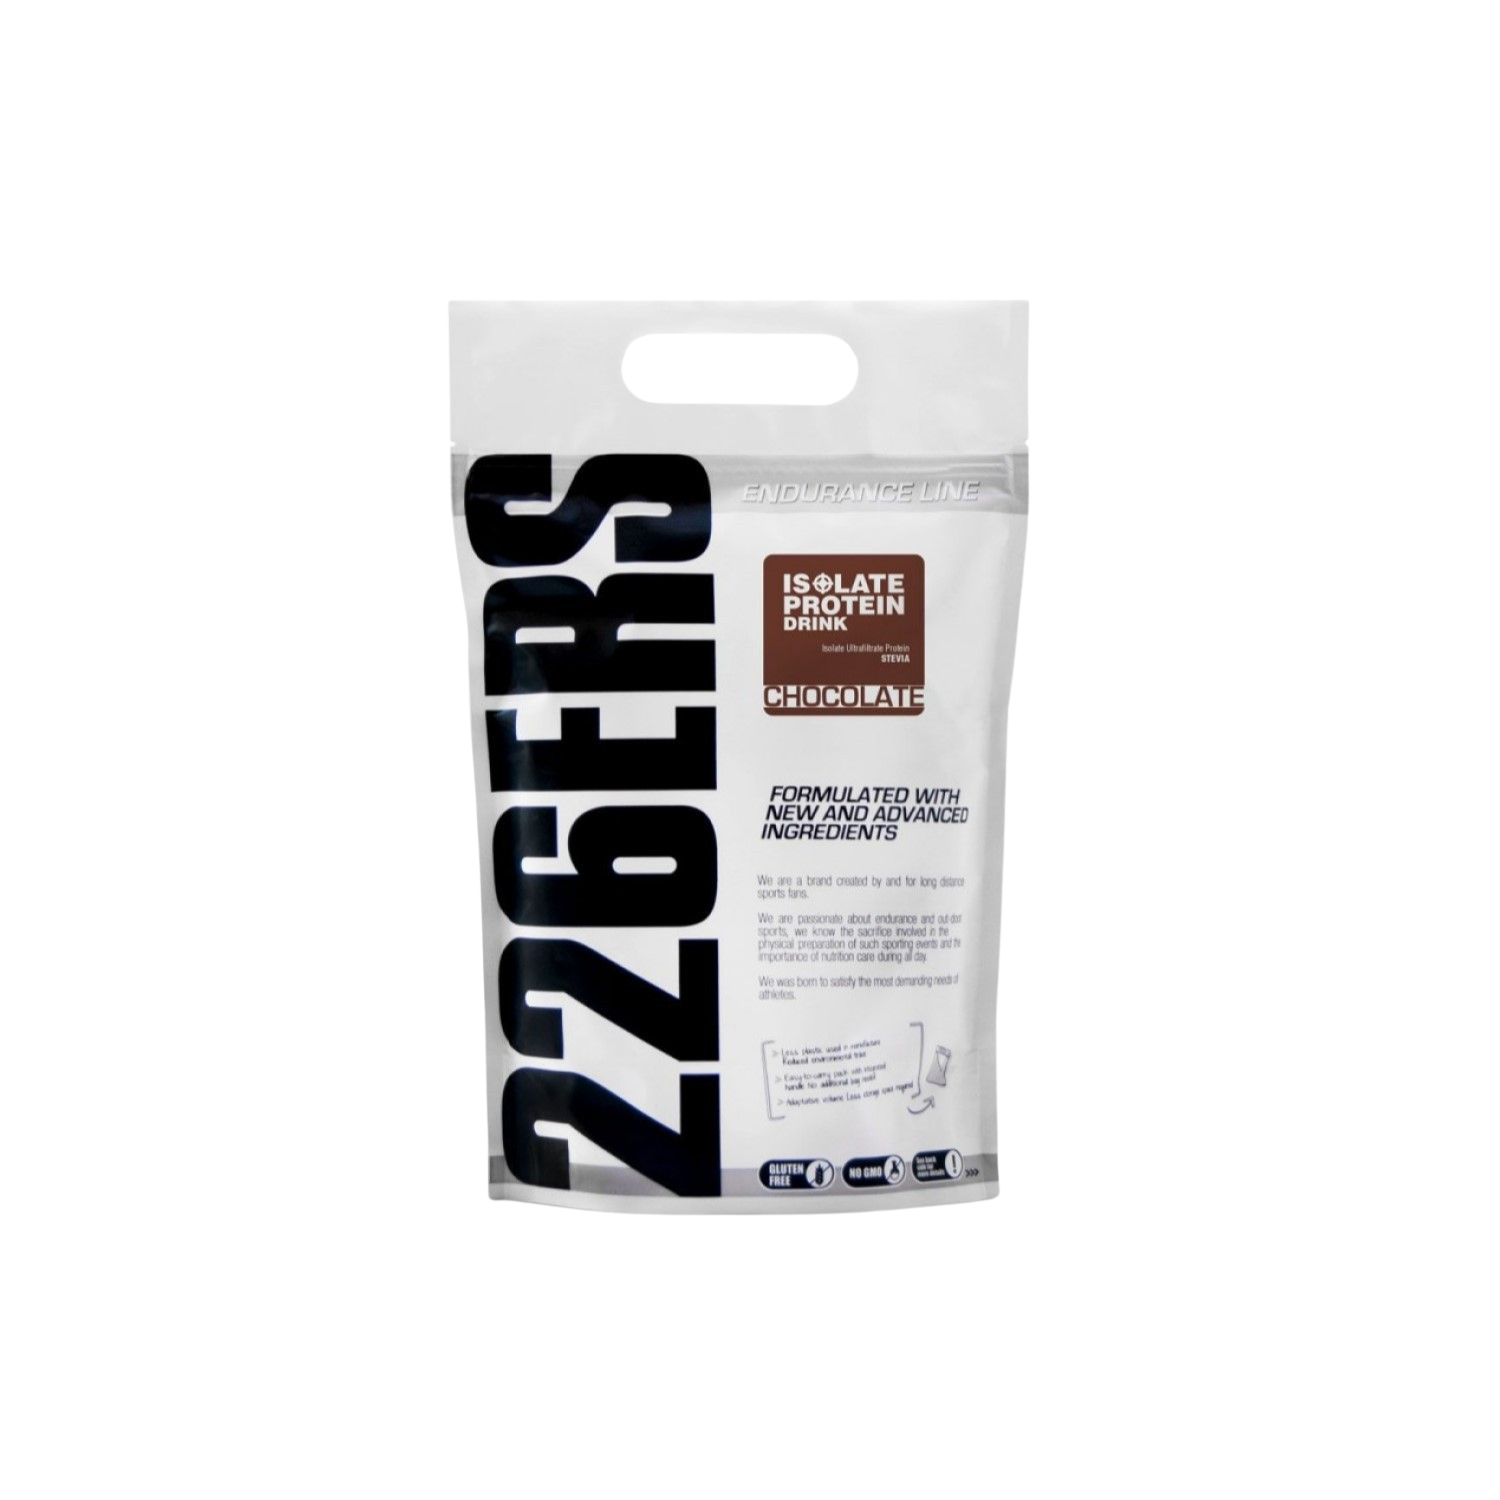 Suplemento De 226ers isolate protein drink 1 kg sabor chocolate